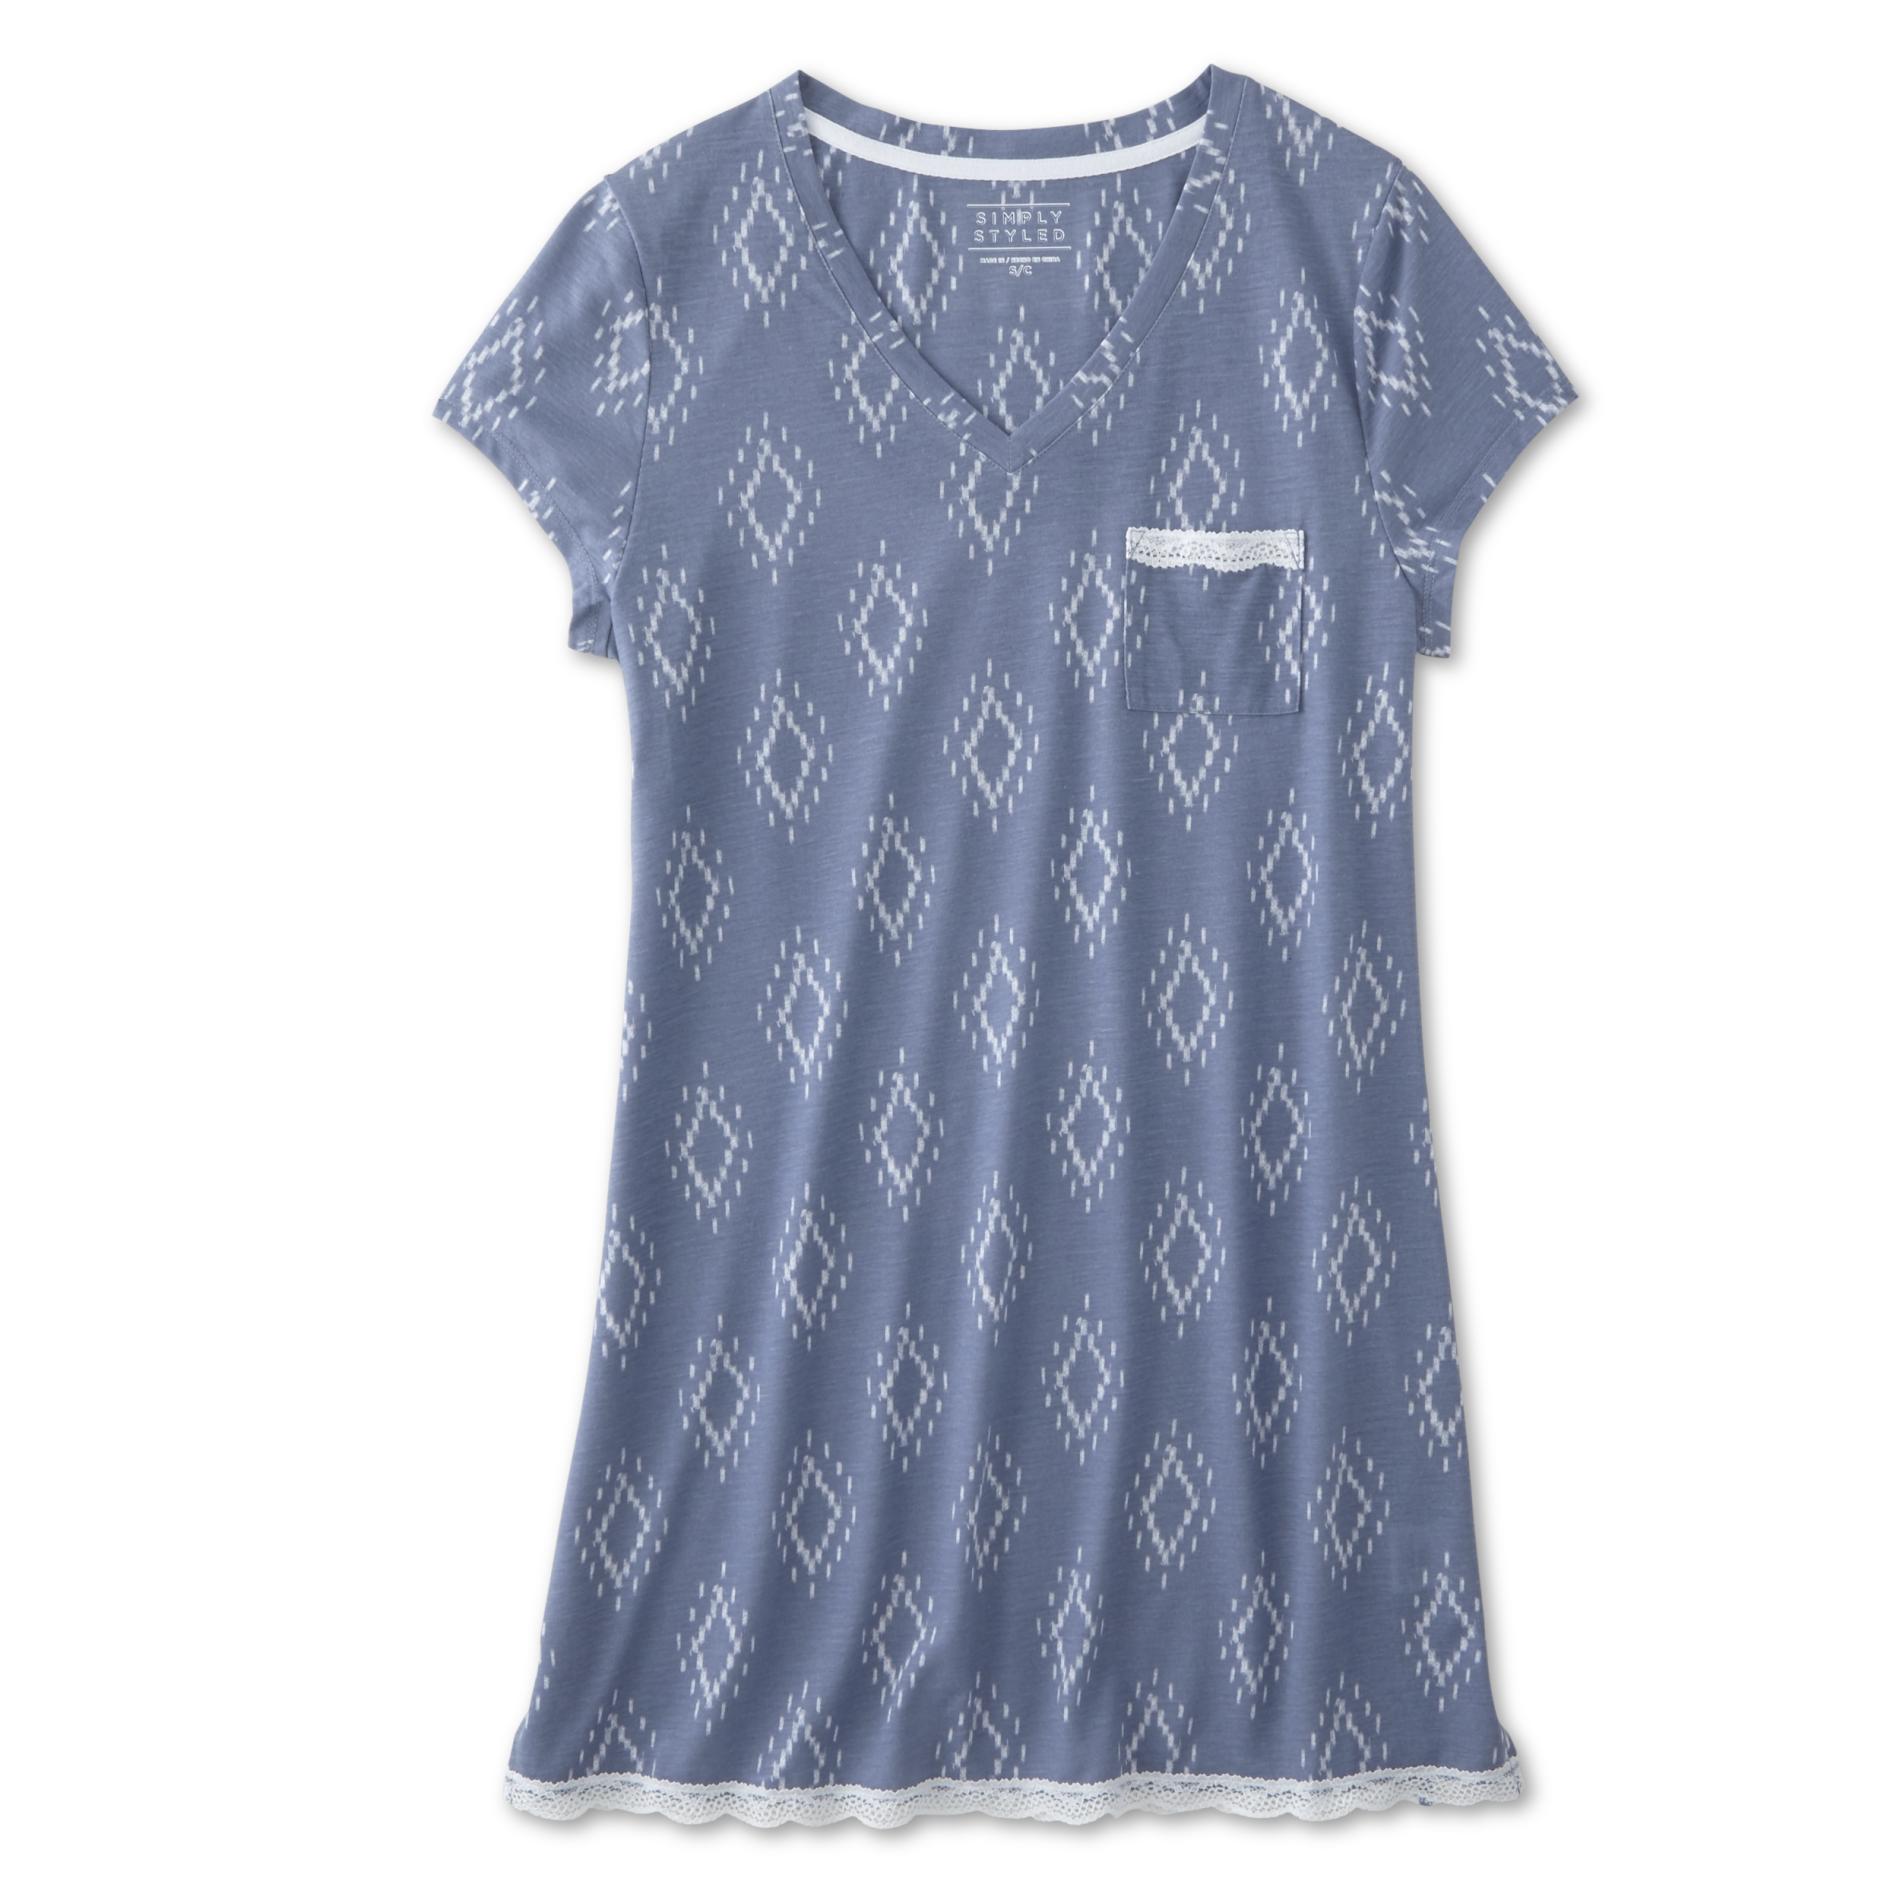 Simply Styled Women's Plus Nightgown - Geometric